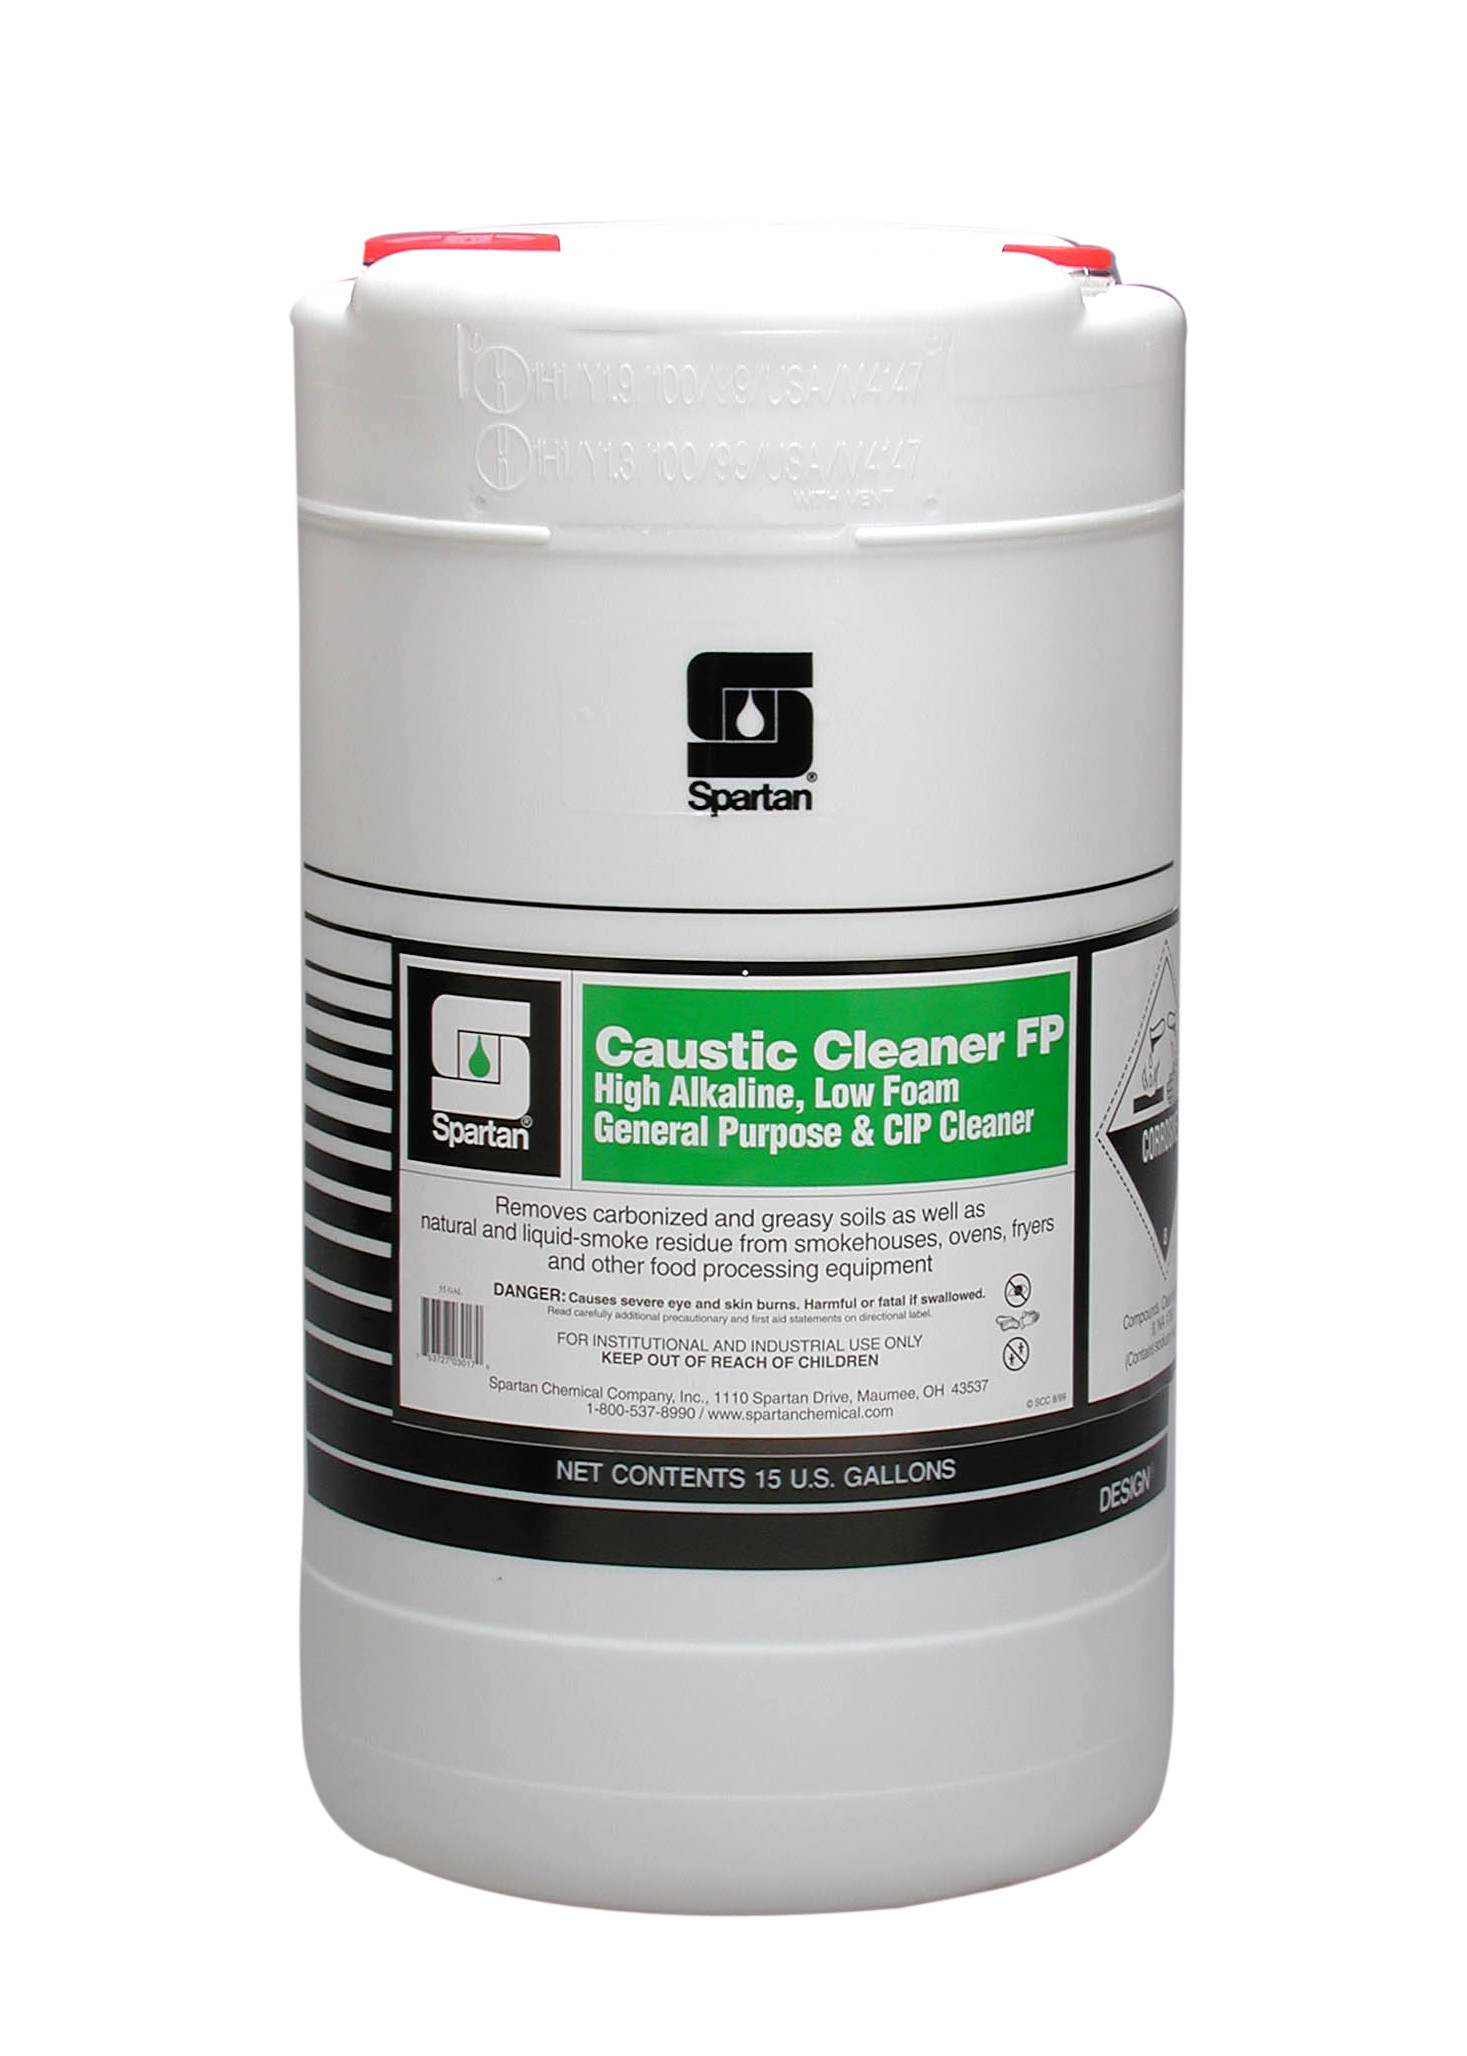 Spartan Chemical Company Caustic Cleaner FP, 15 GAL DRUM